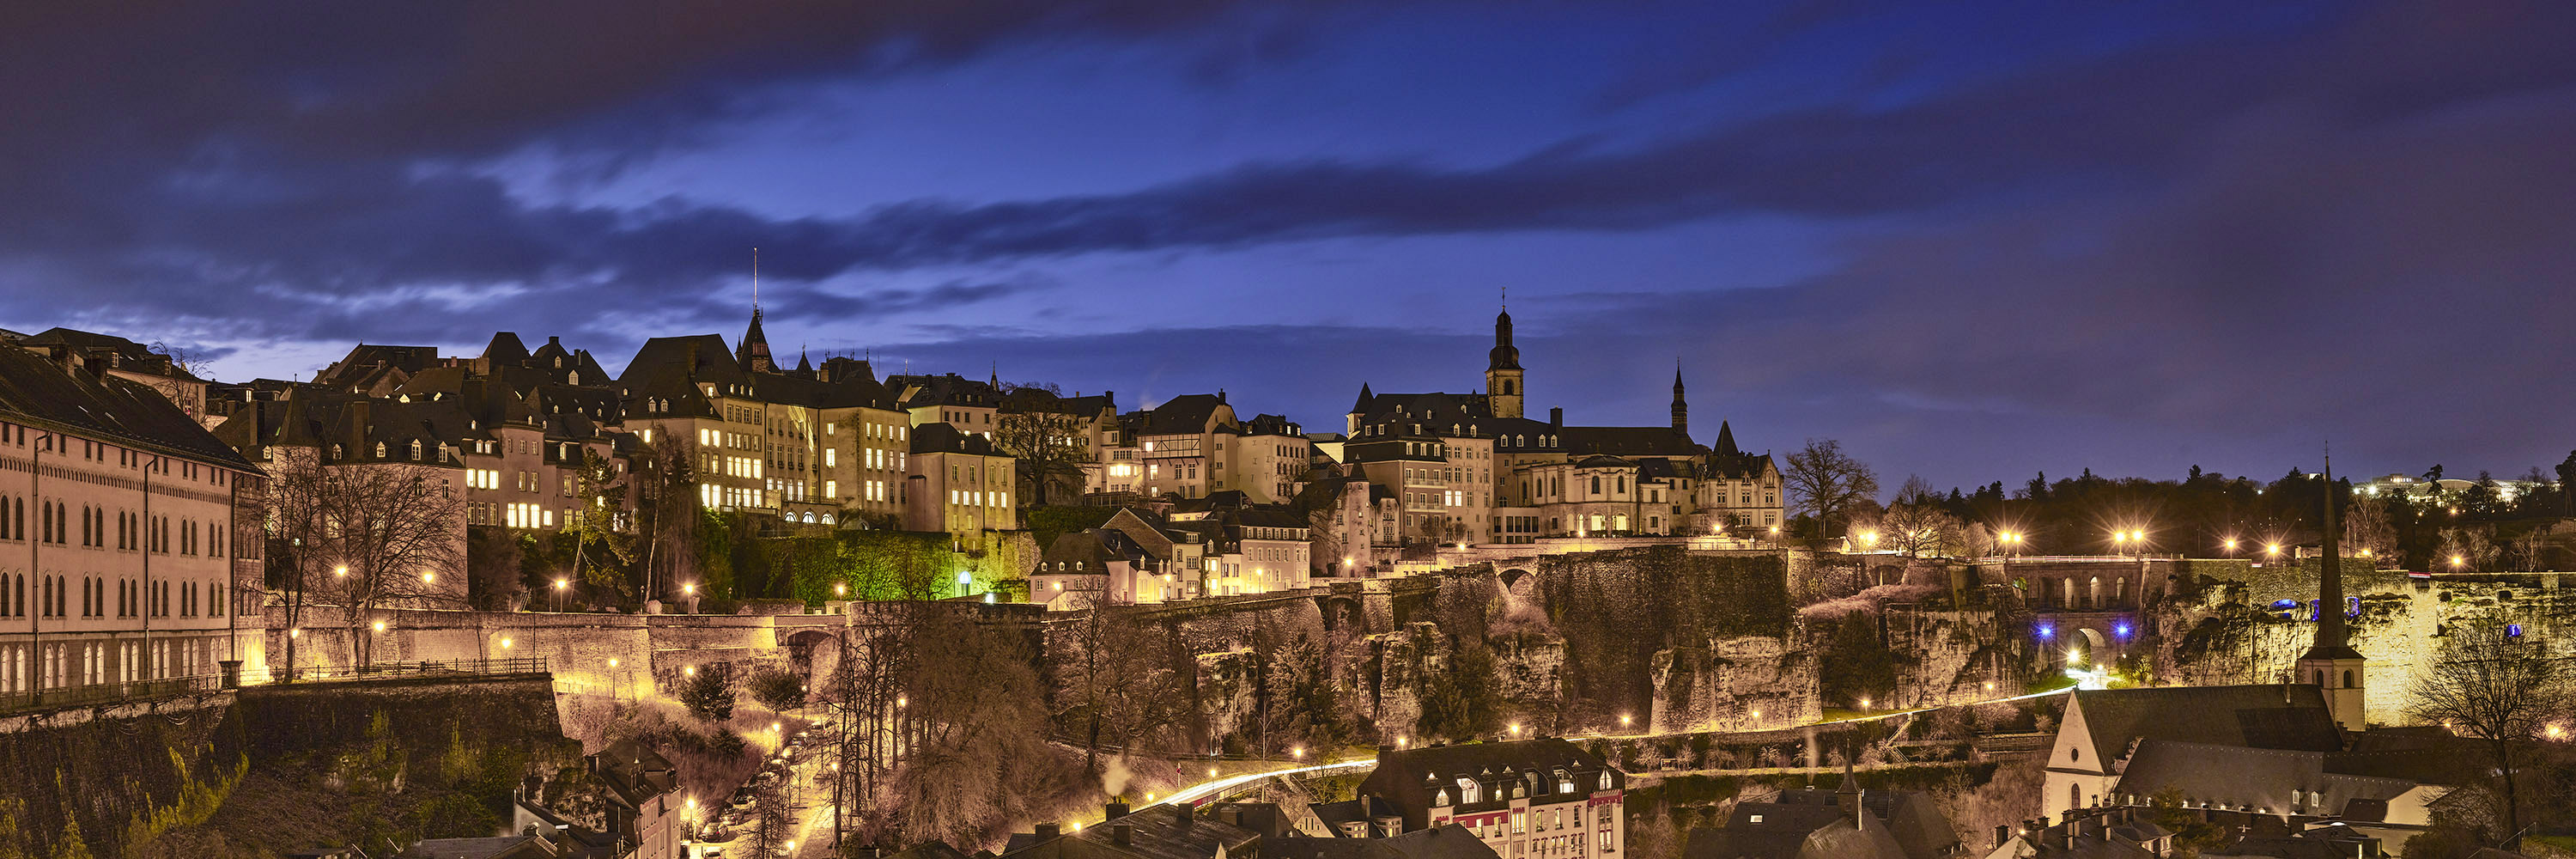 Photograph of Luxembourg Panorama